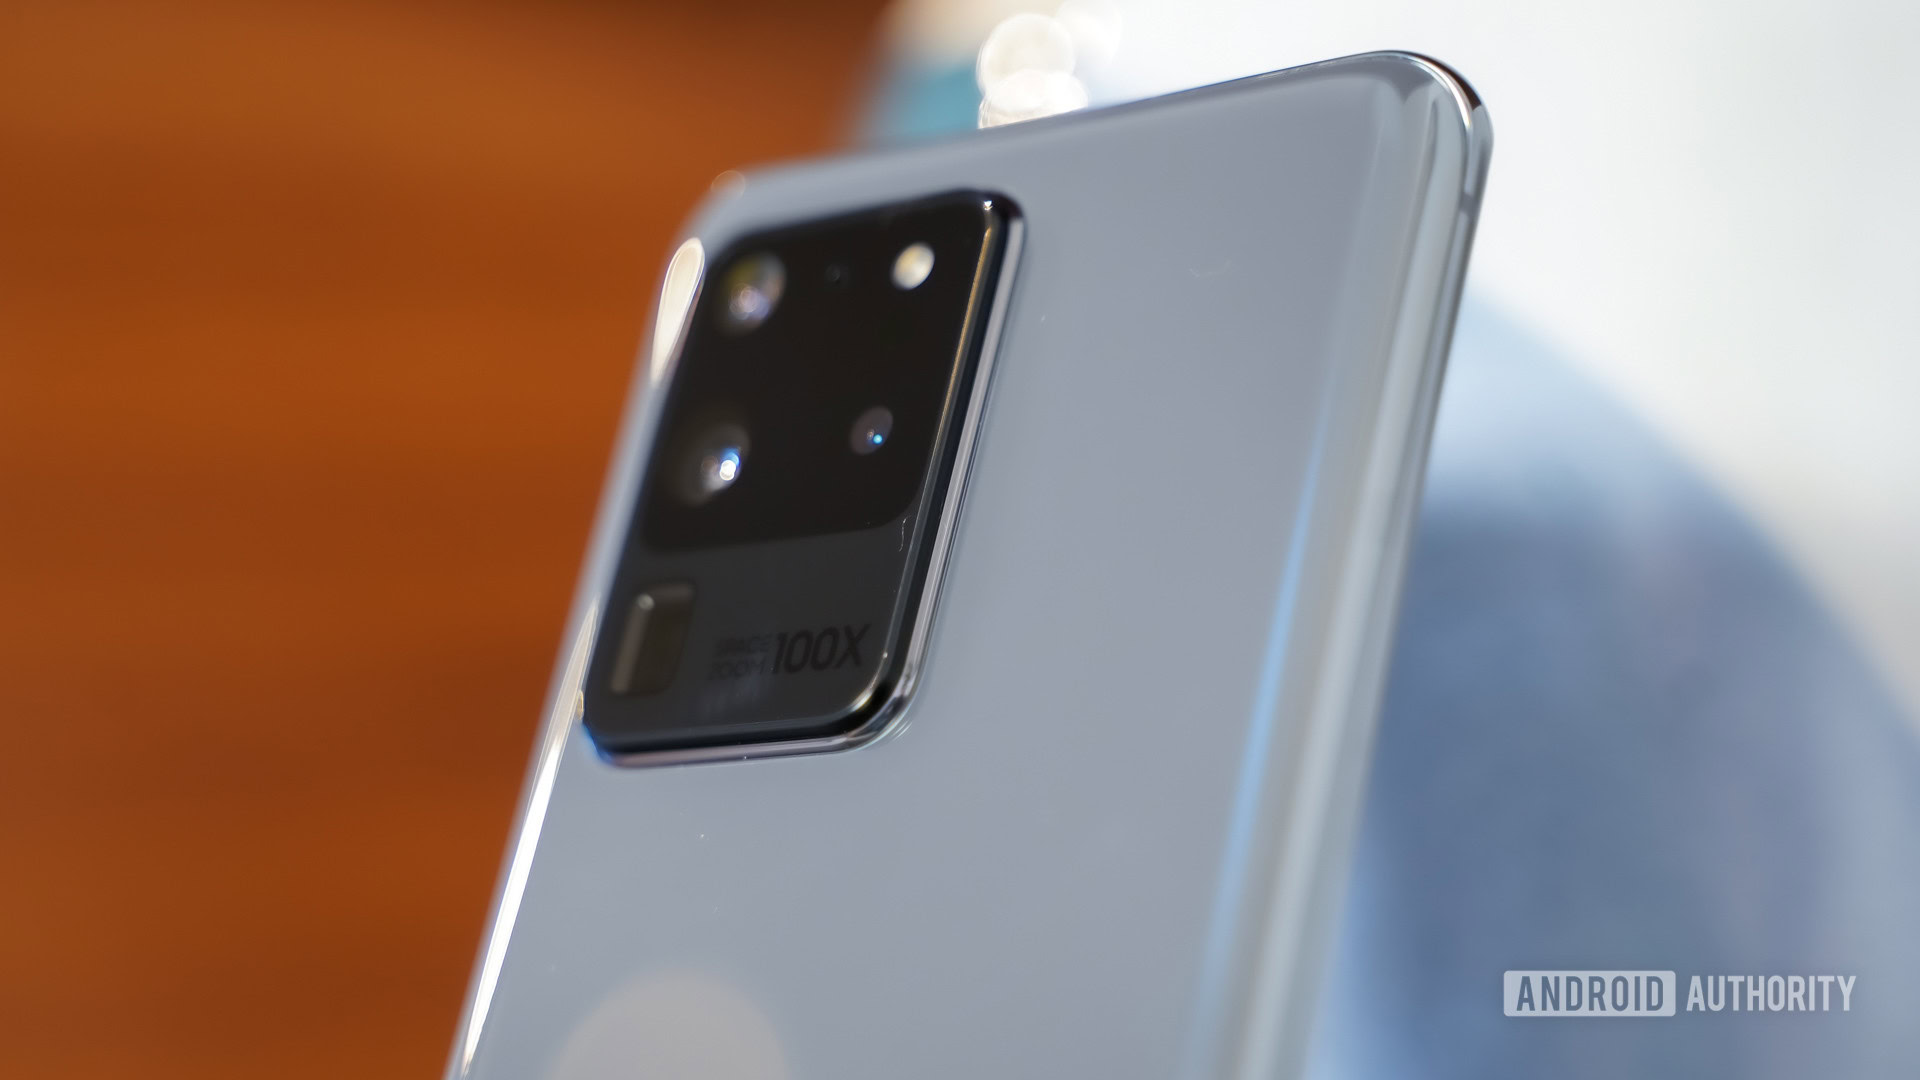 Samsung Galaxy S20 Vs iPhone 11 Pro: 5 Features Samsung Does Better